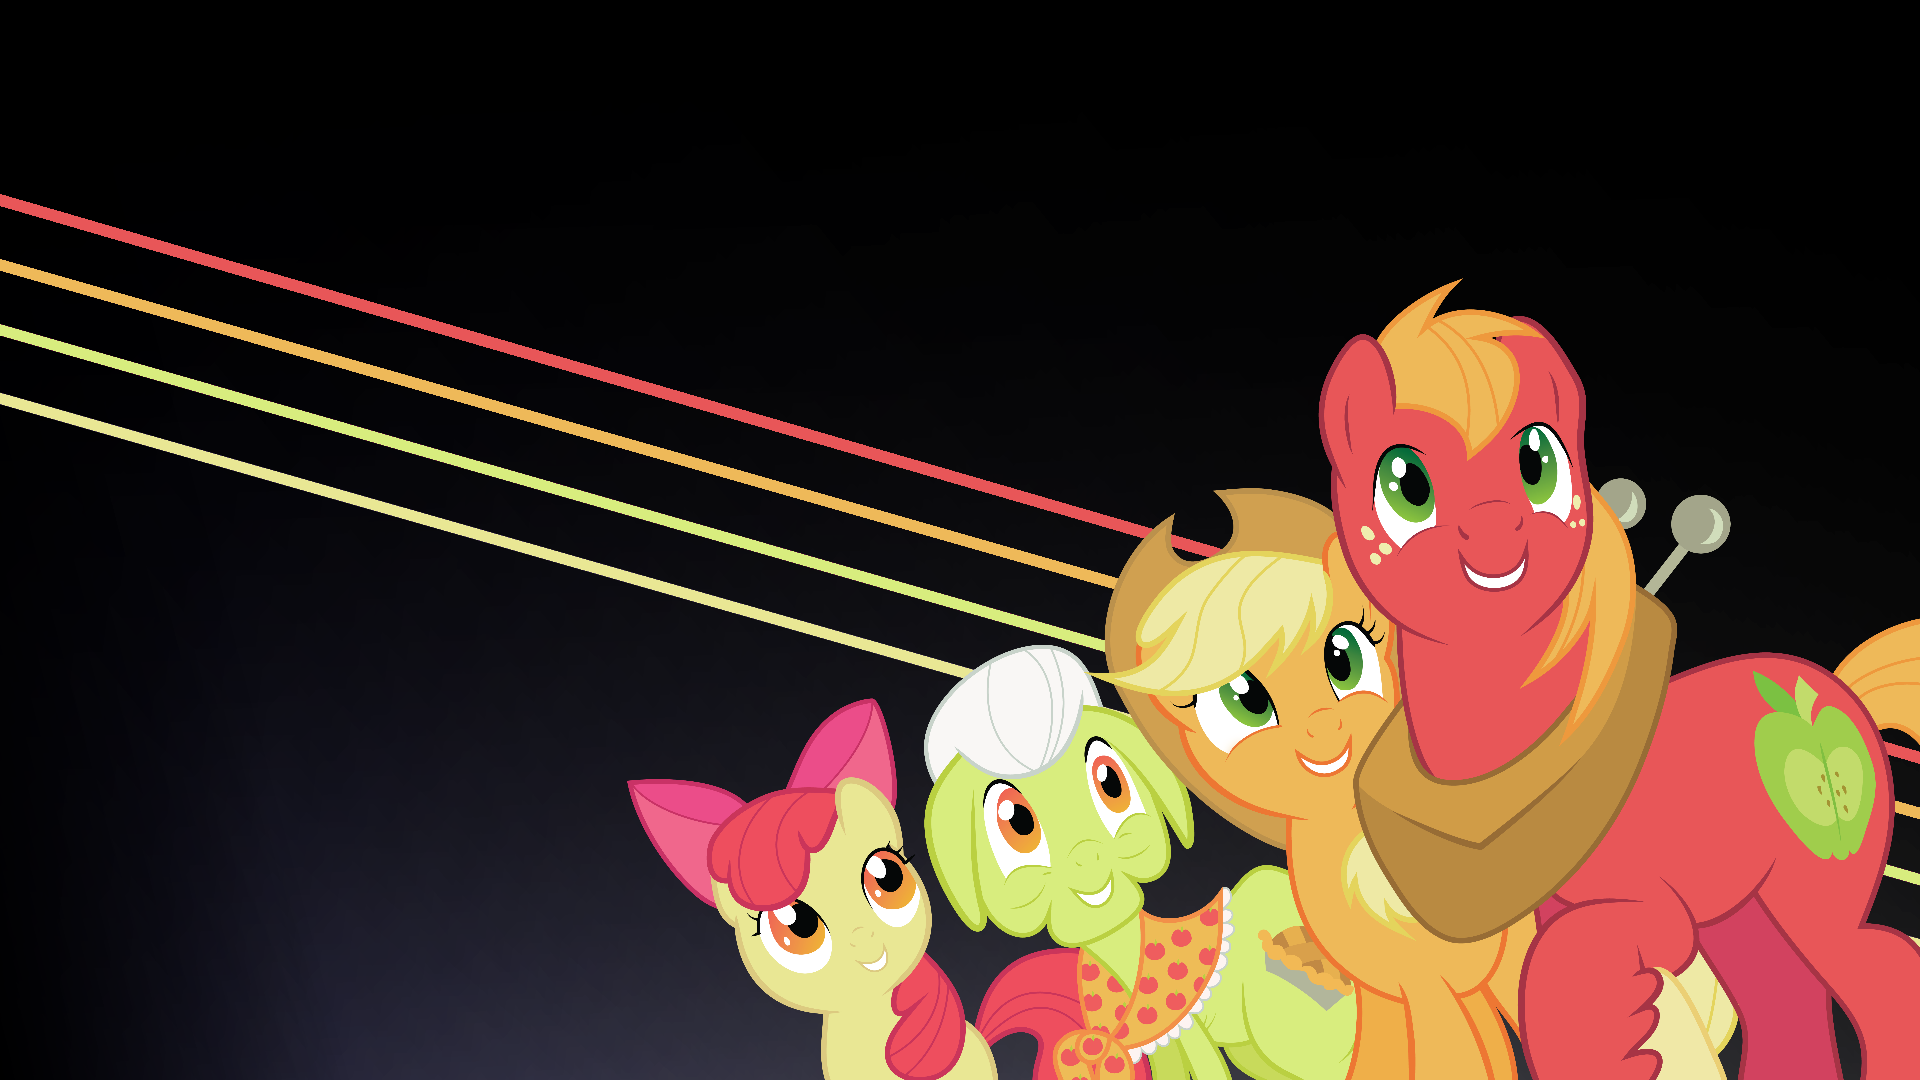 The Apple Family by shieldbug1 and Squeemishness